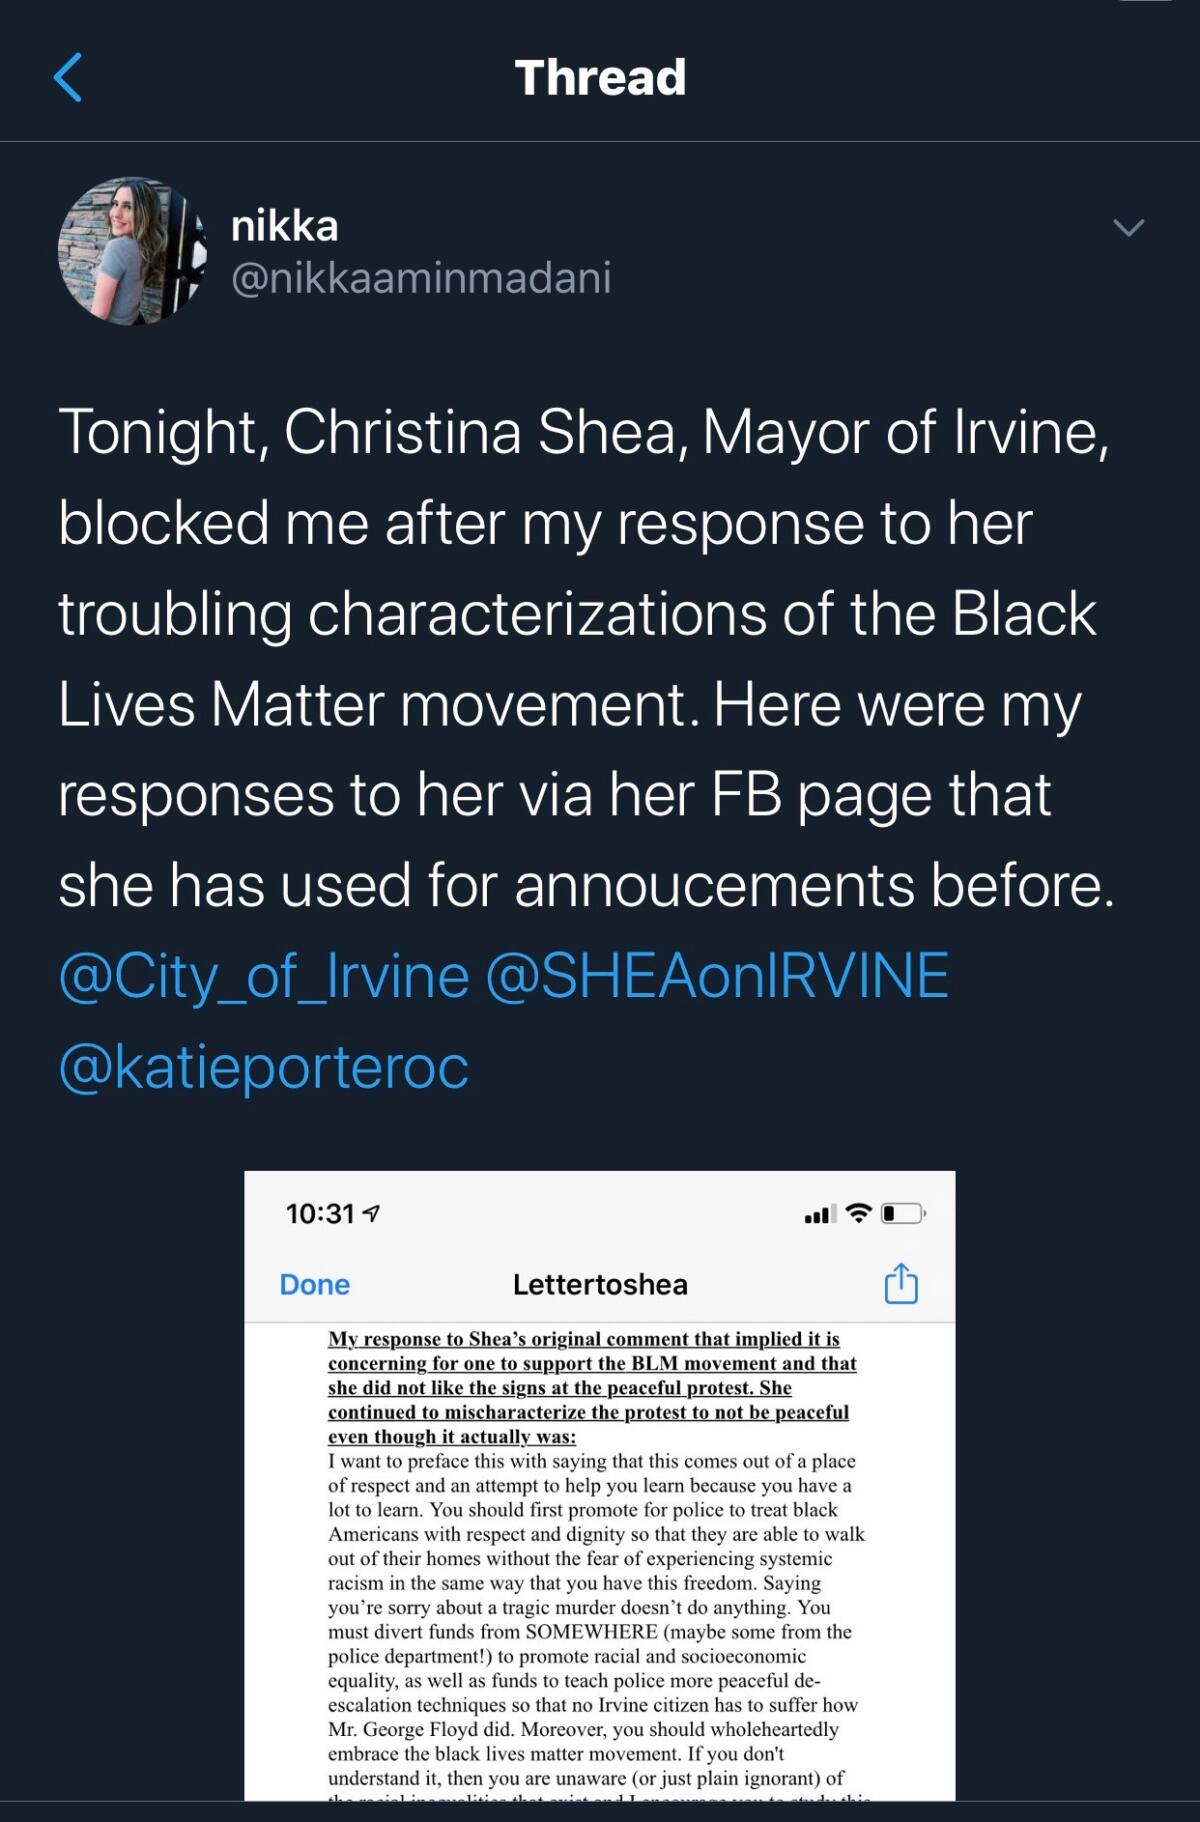 Online users says they were blocked by Mayor Christina Shea for comments made on her personal Facebook page.